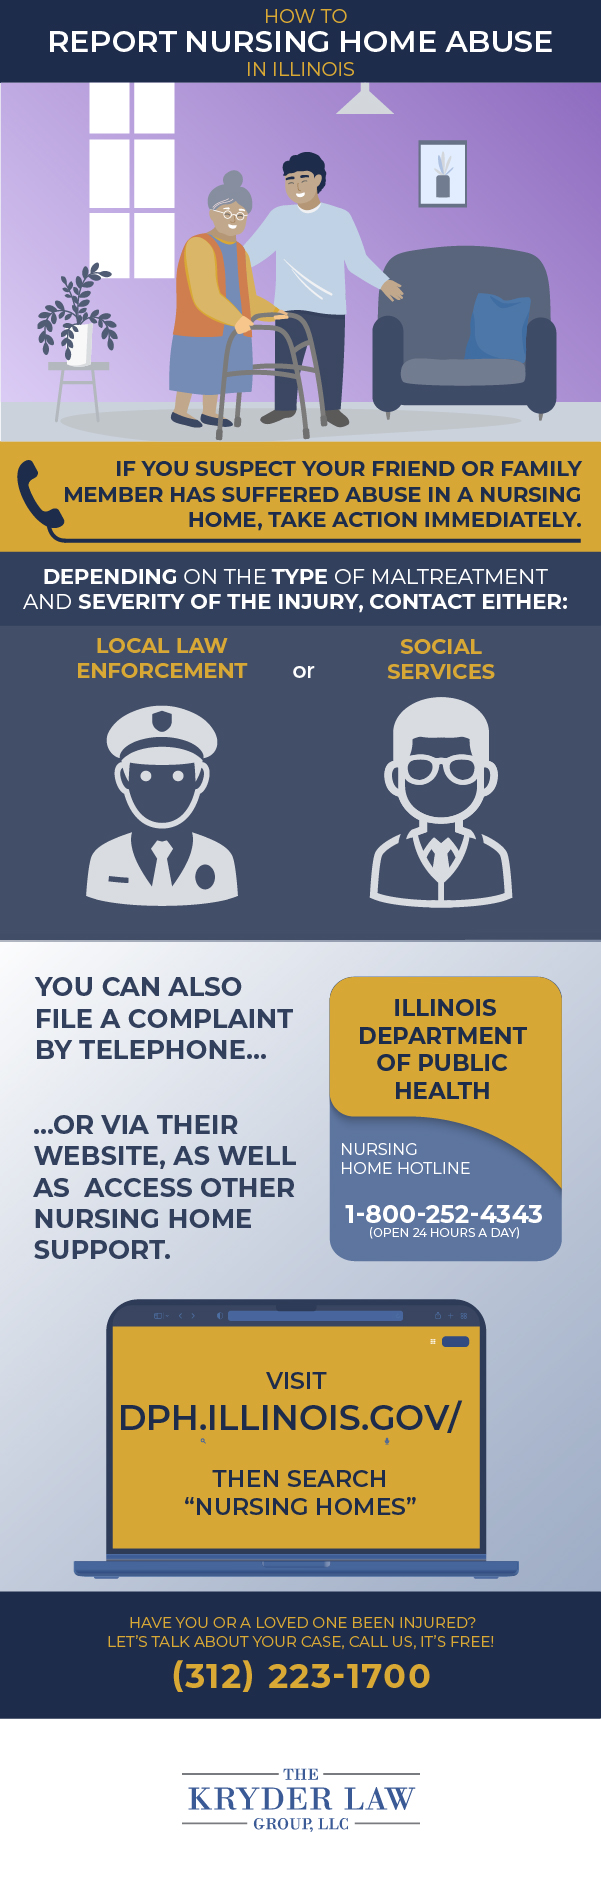 How To Report Nursing Home Abuse in Illinois